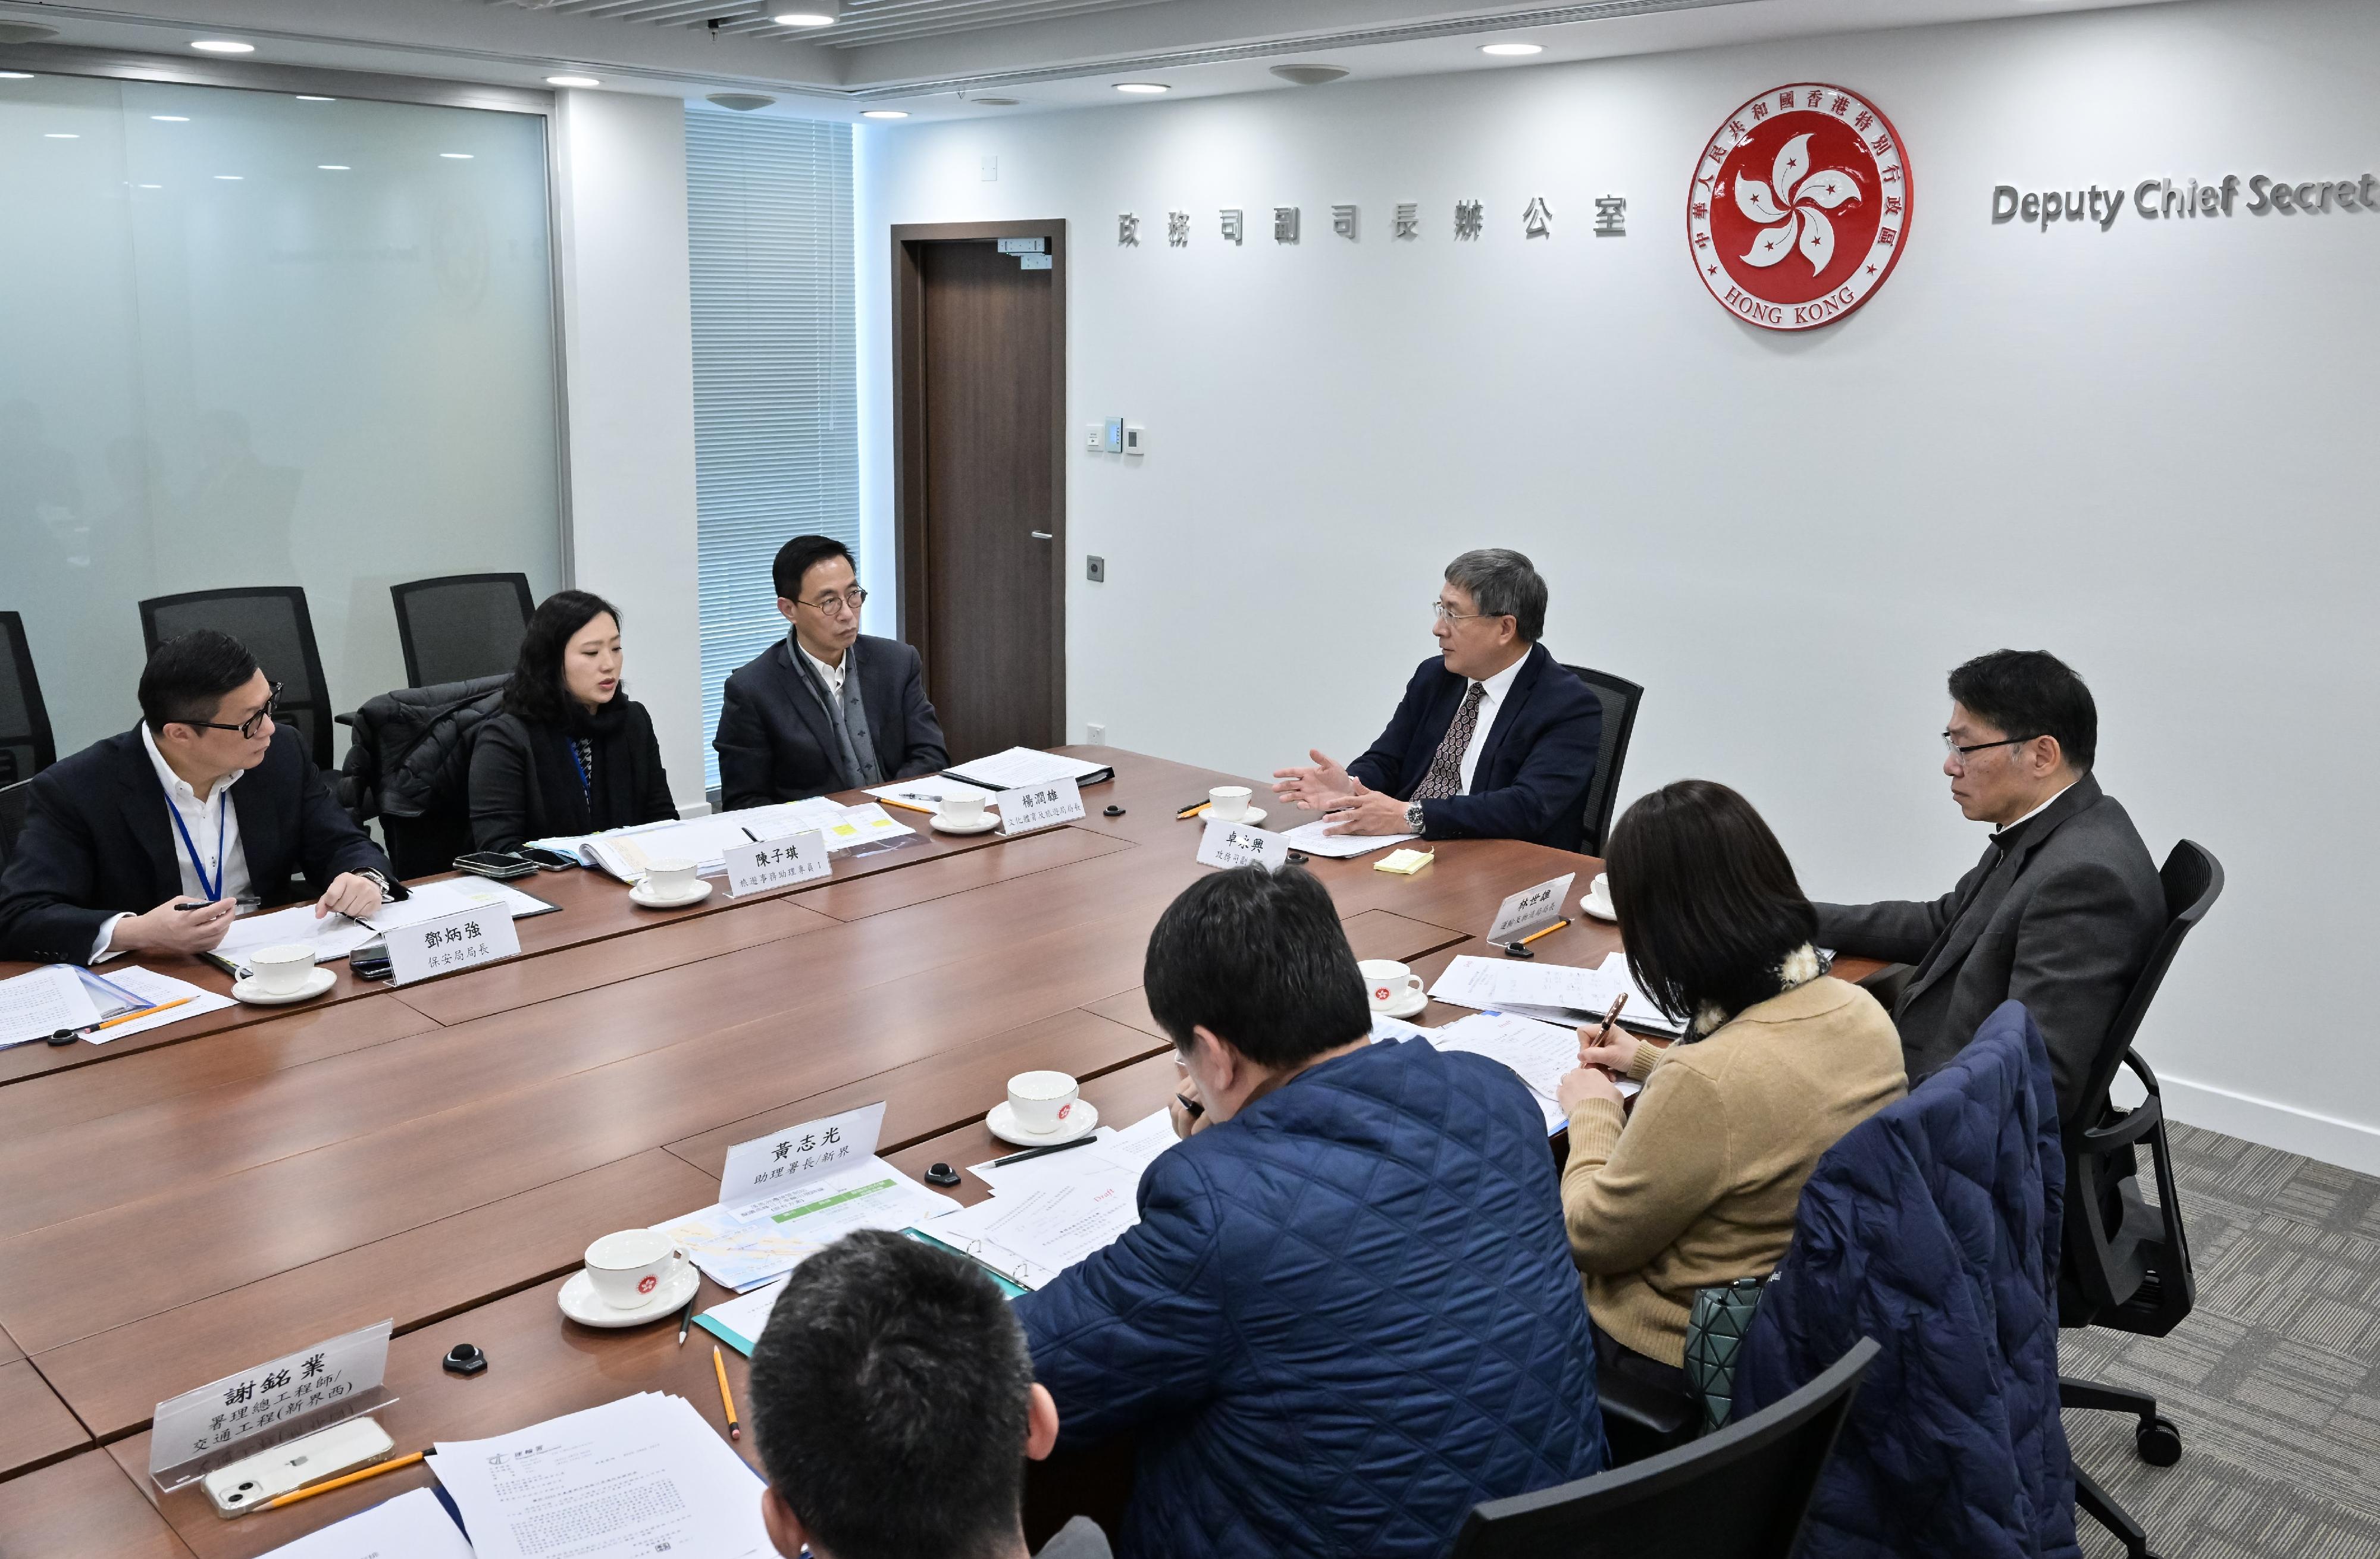 The Acting Chief Secretary for Administration, Mr Cheuk Wing-hing, today (January 23) chairs a meeting on cross-boundary transport arrangements for large-scale events to co-ordinate the work of government departments on special boundary-crossing arrangements during the Lunar New Year holidays and the respective transport arrangements to ensure smooth implementation of the measures.